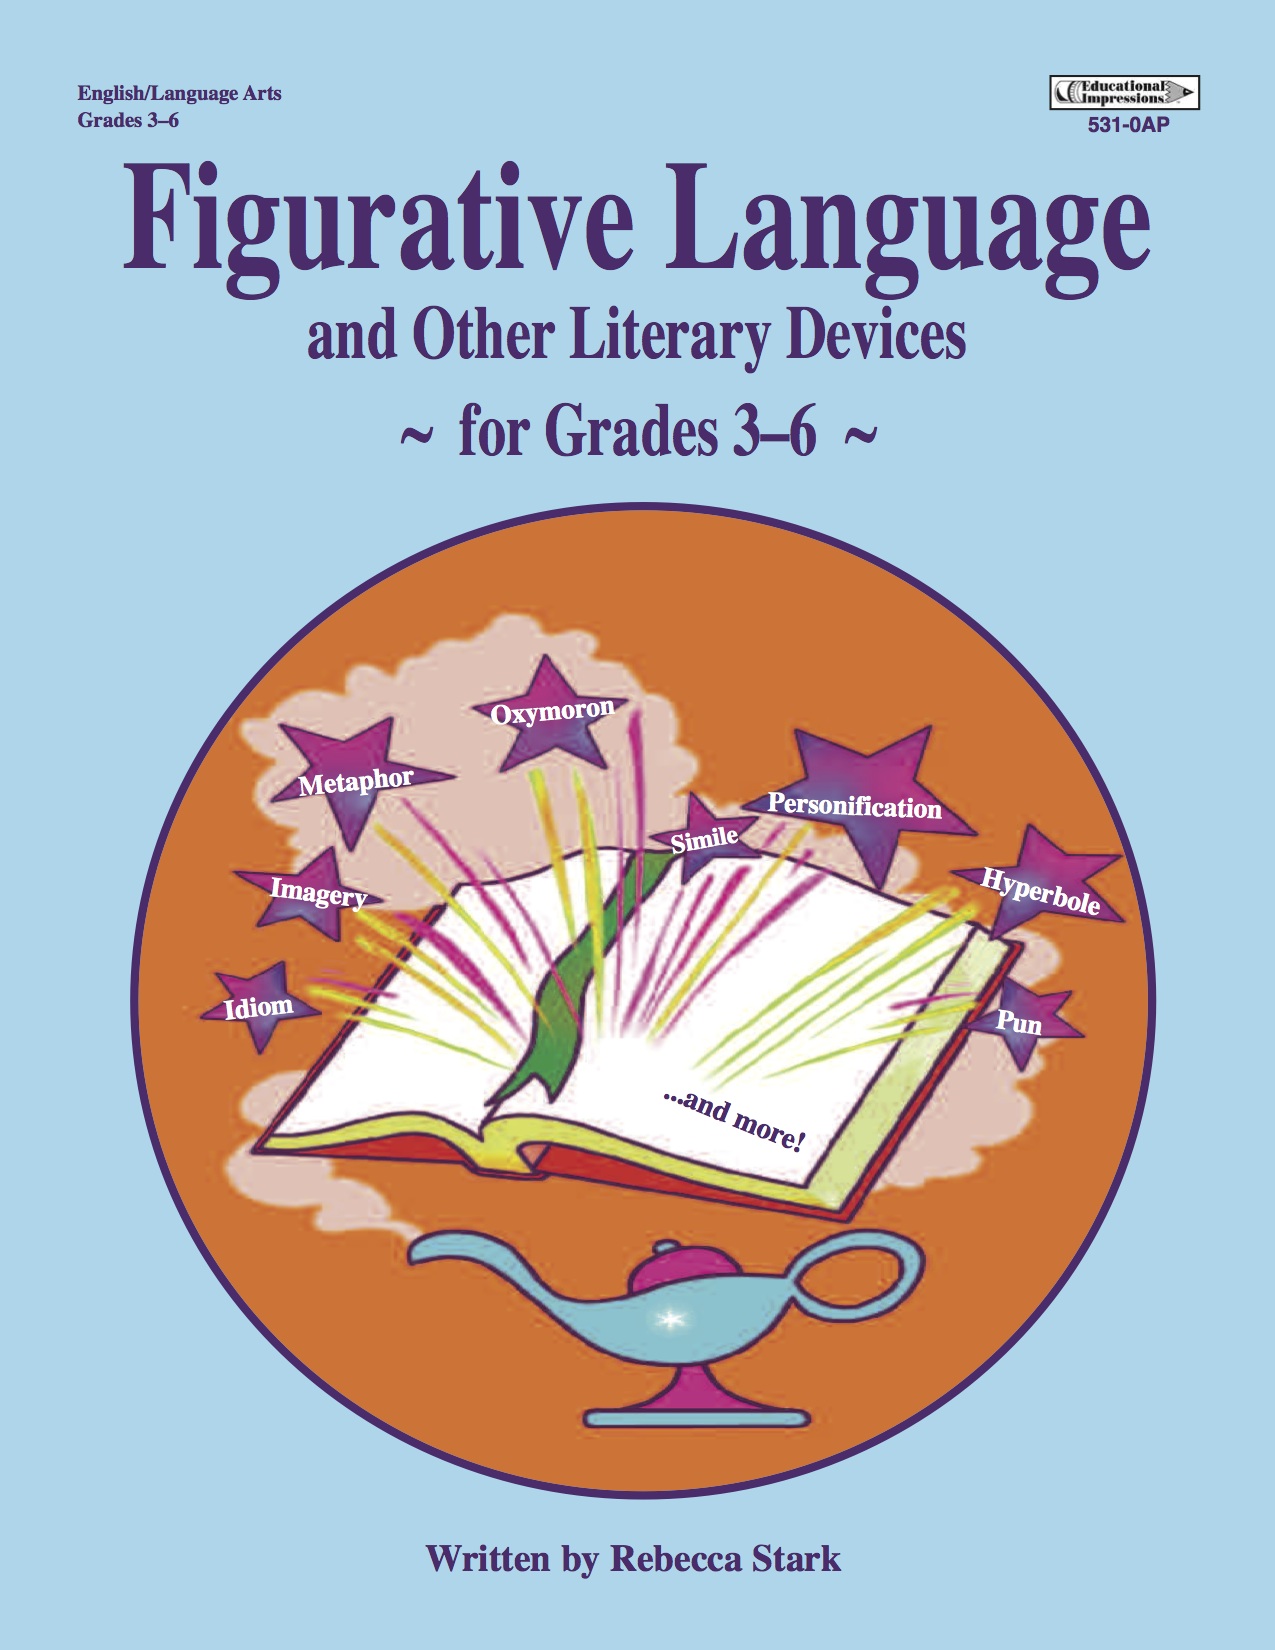 Figurative Language and Other Literary Devices, Grades 36 (531-0AP)